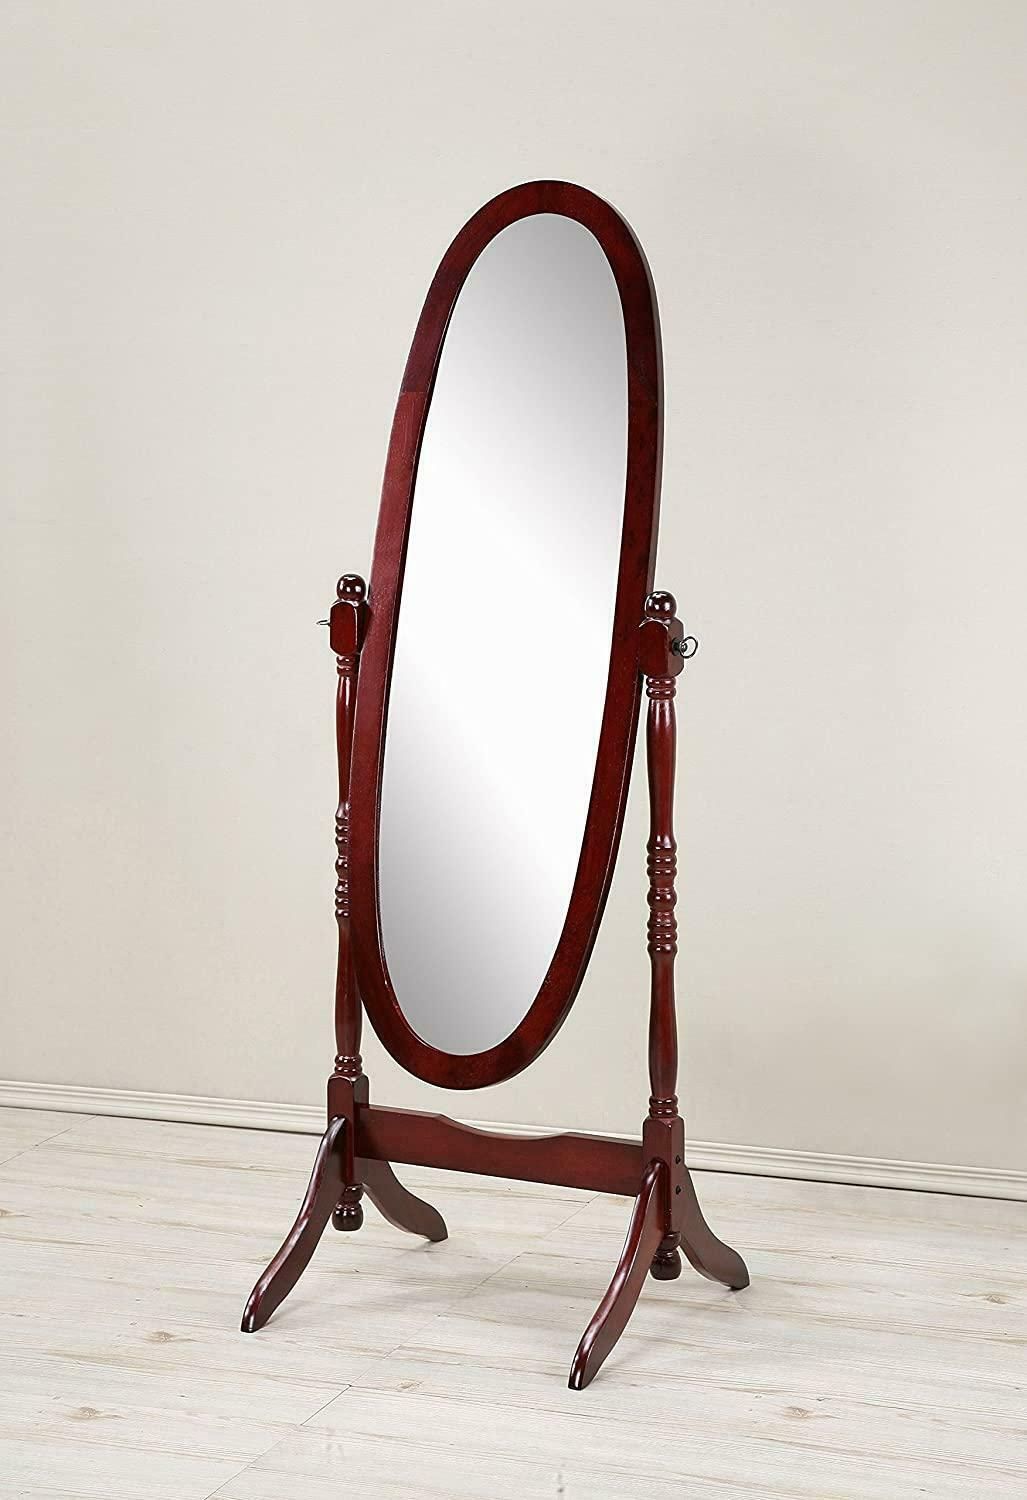 Antique Floor Mirror Wood Bedroom Dressing Full Length Cheval Free Regarding Antique Brass Standing Mirrors (View 13 of 15)